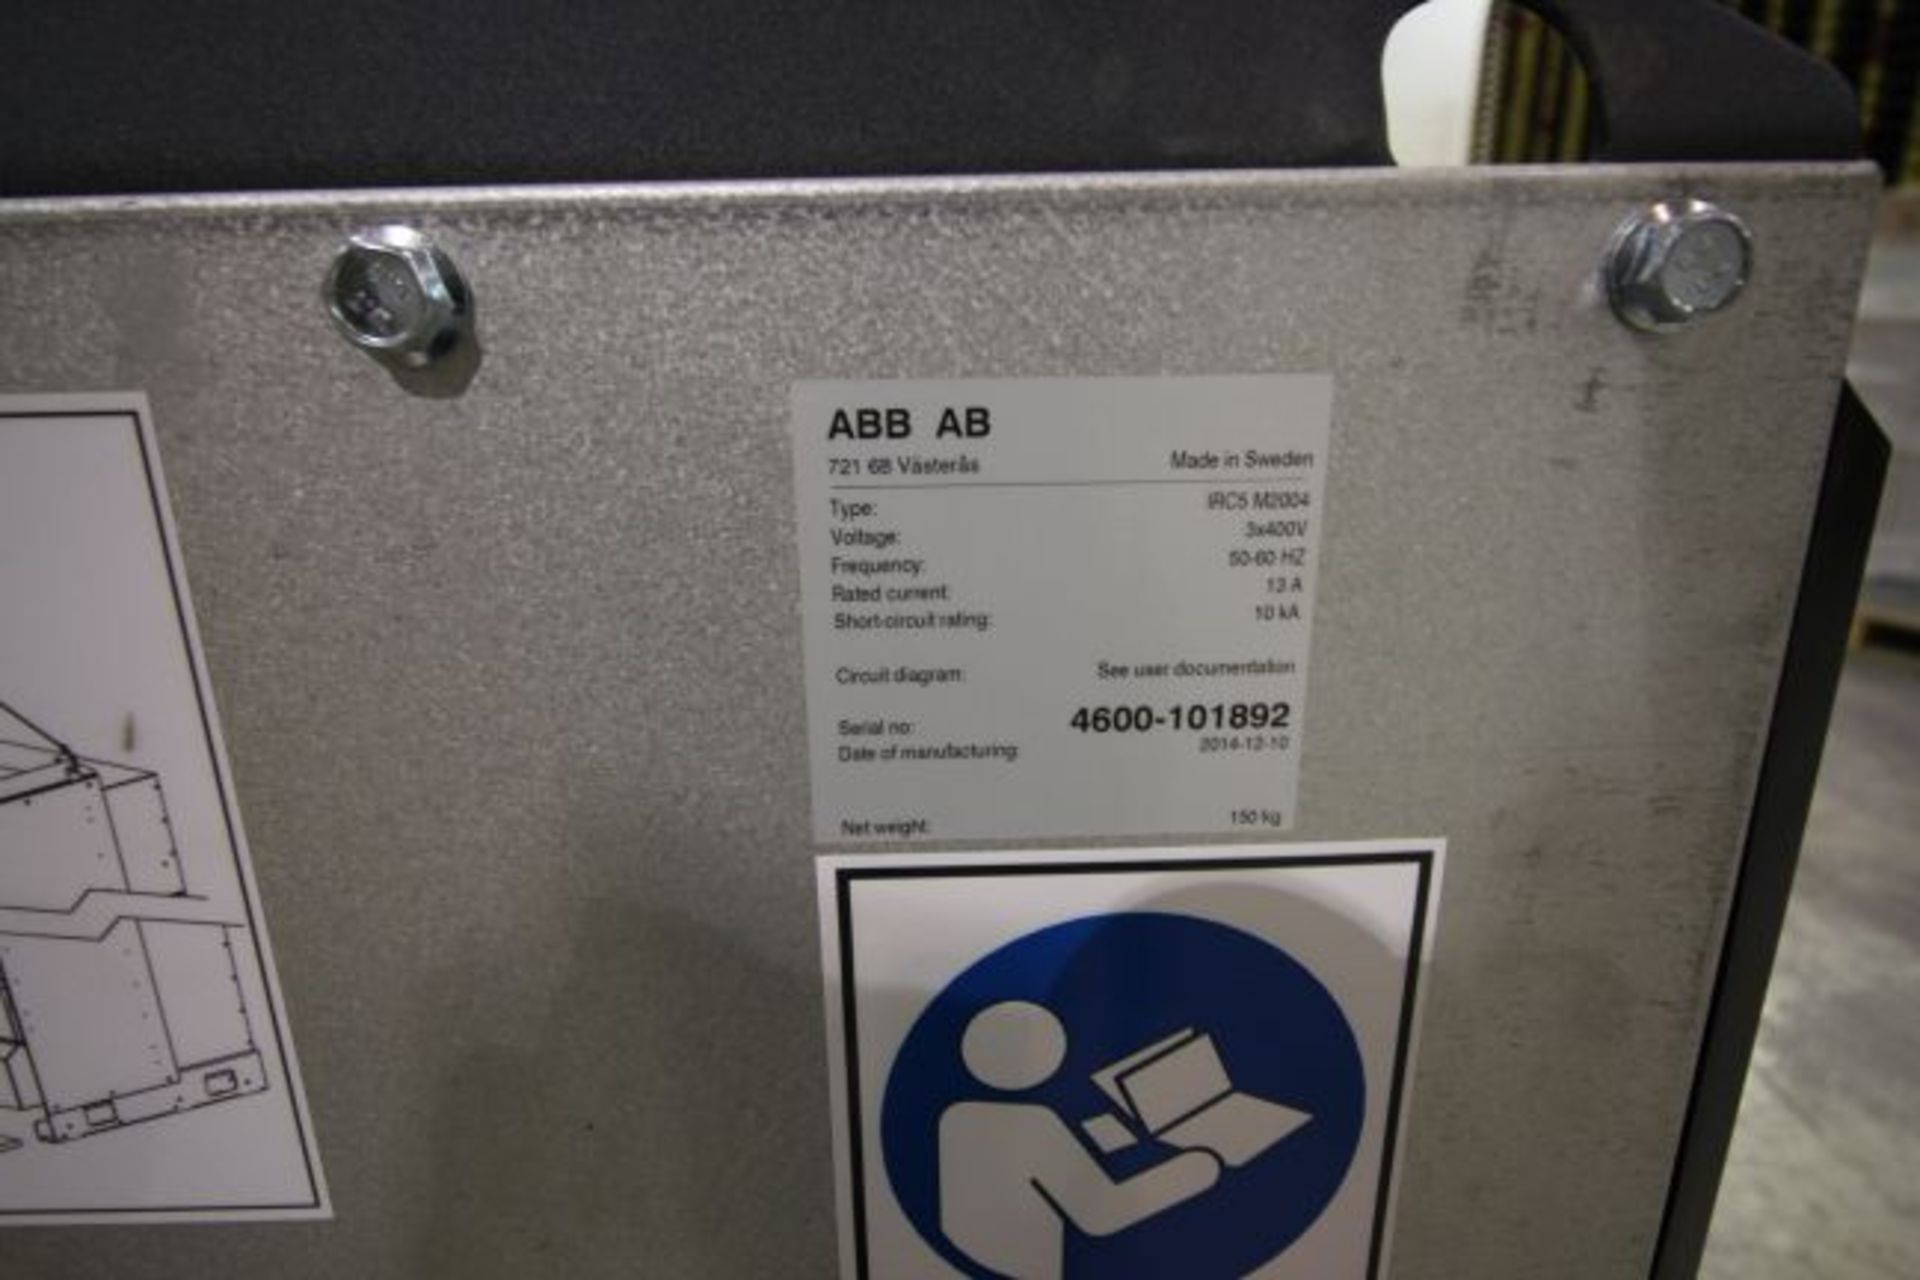 (NEW) ABB ROBOT IRB 4600 2.55/40KG WITH IRC5 CONTROLS, YEAR 2014, SN 101892 TEACH PENDANT& CABLES - Image 10 of 10